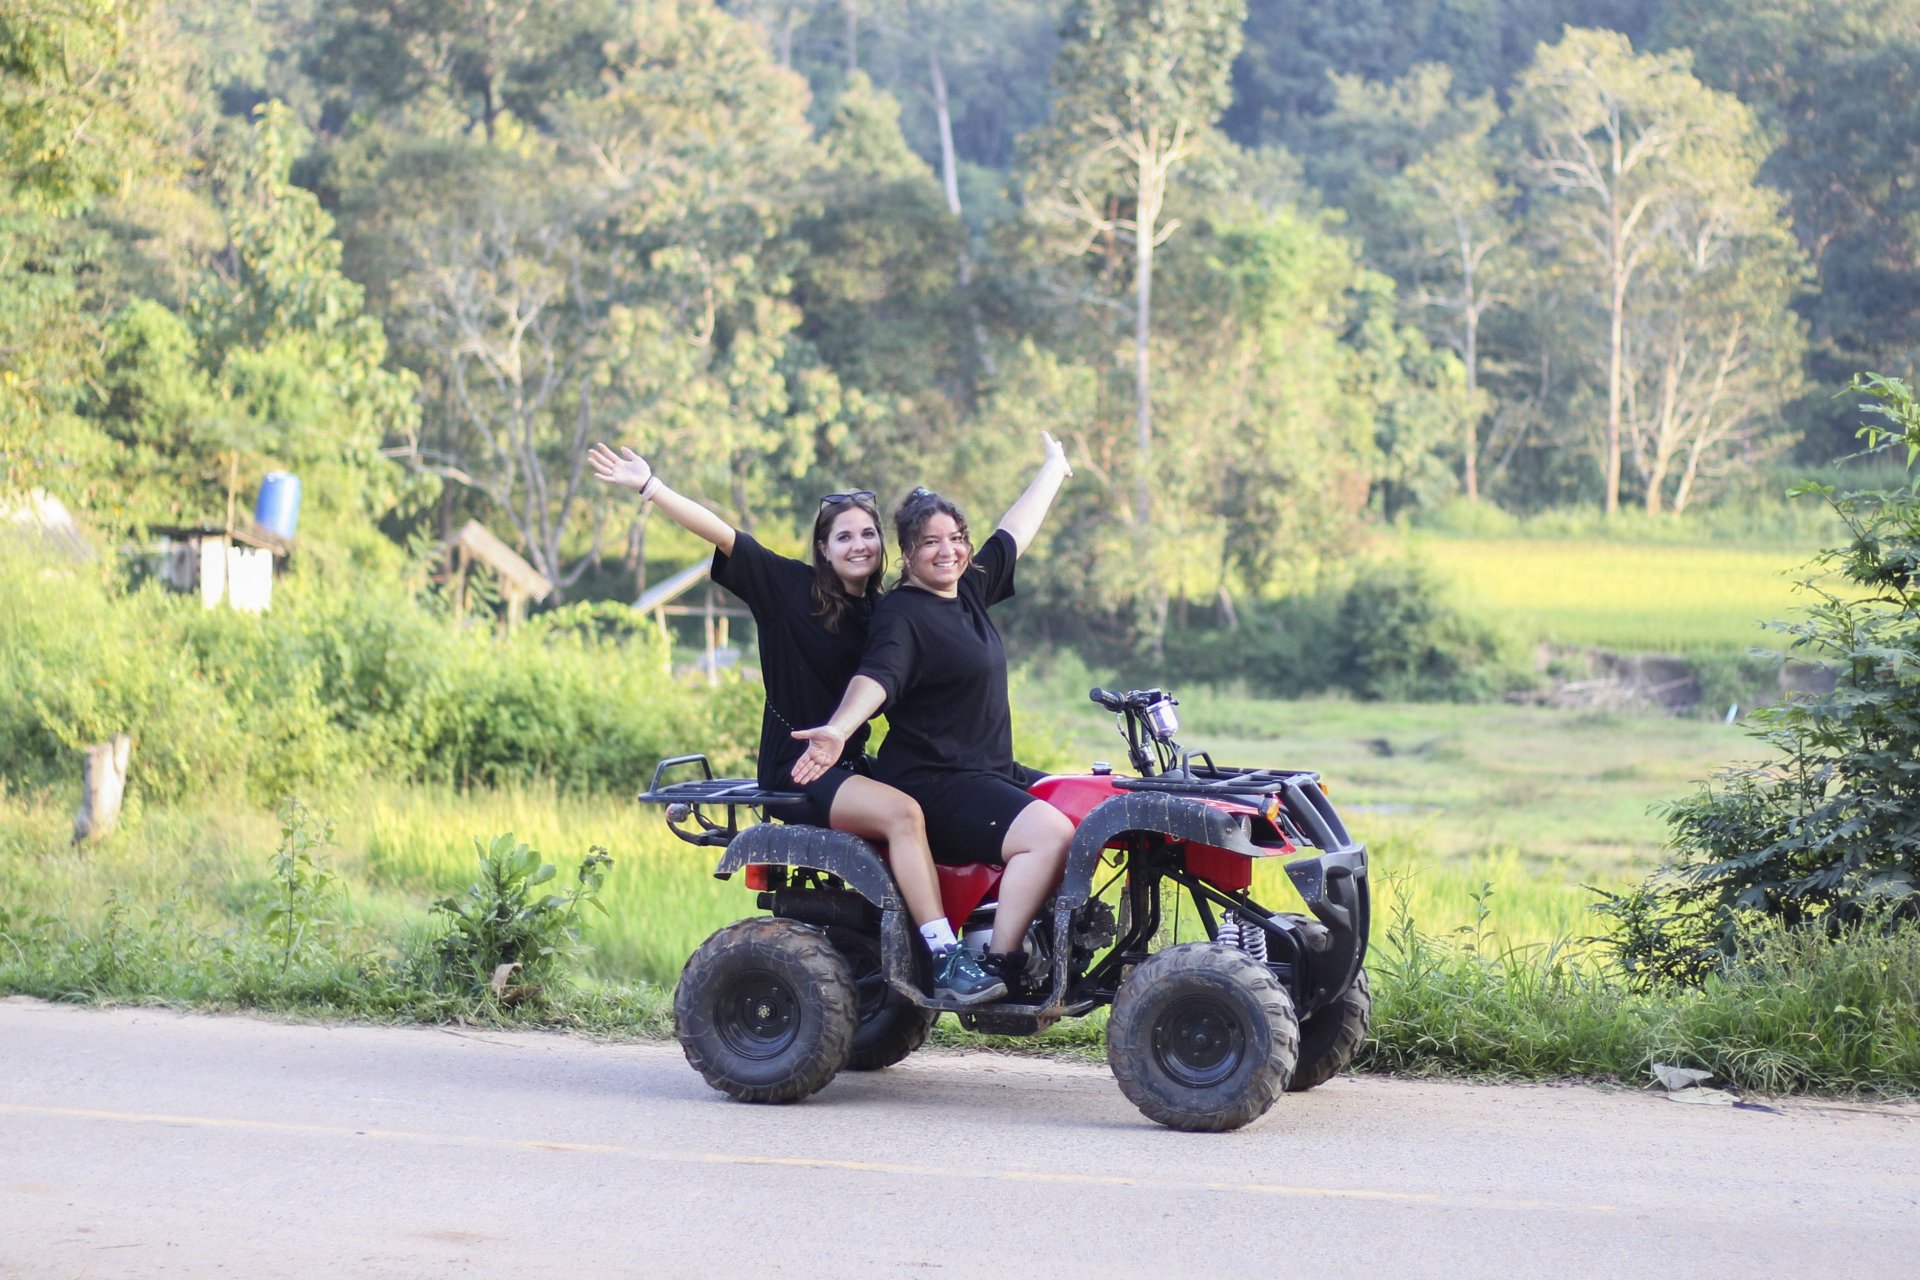 One Day with ATV At Karen Hilltribe Elephant Sanctuary